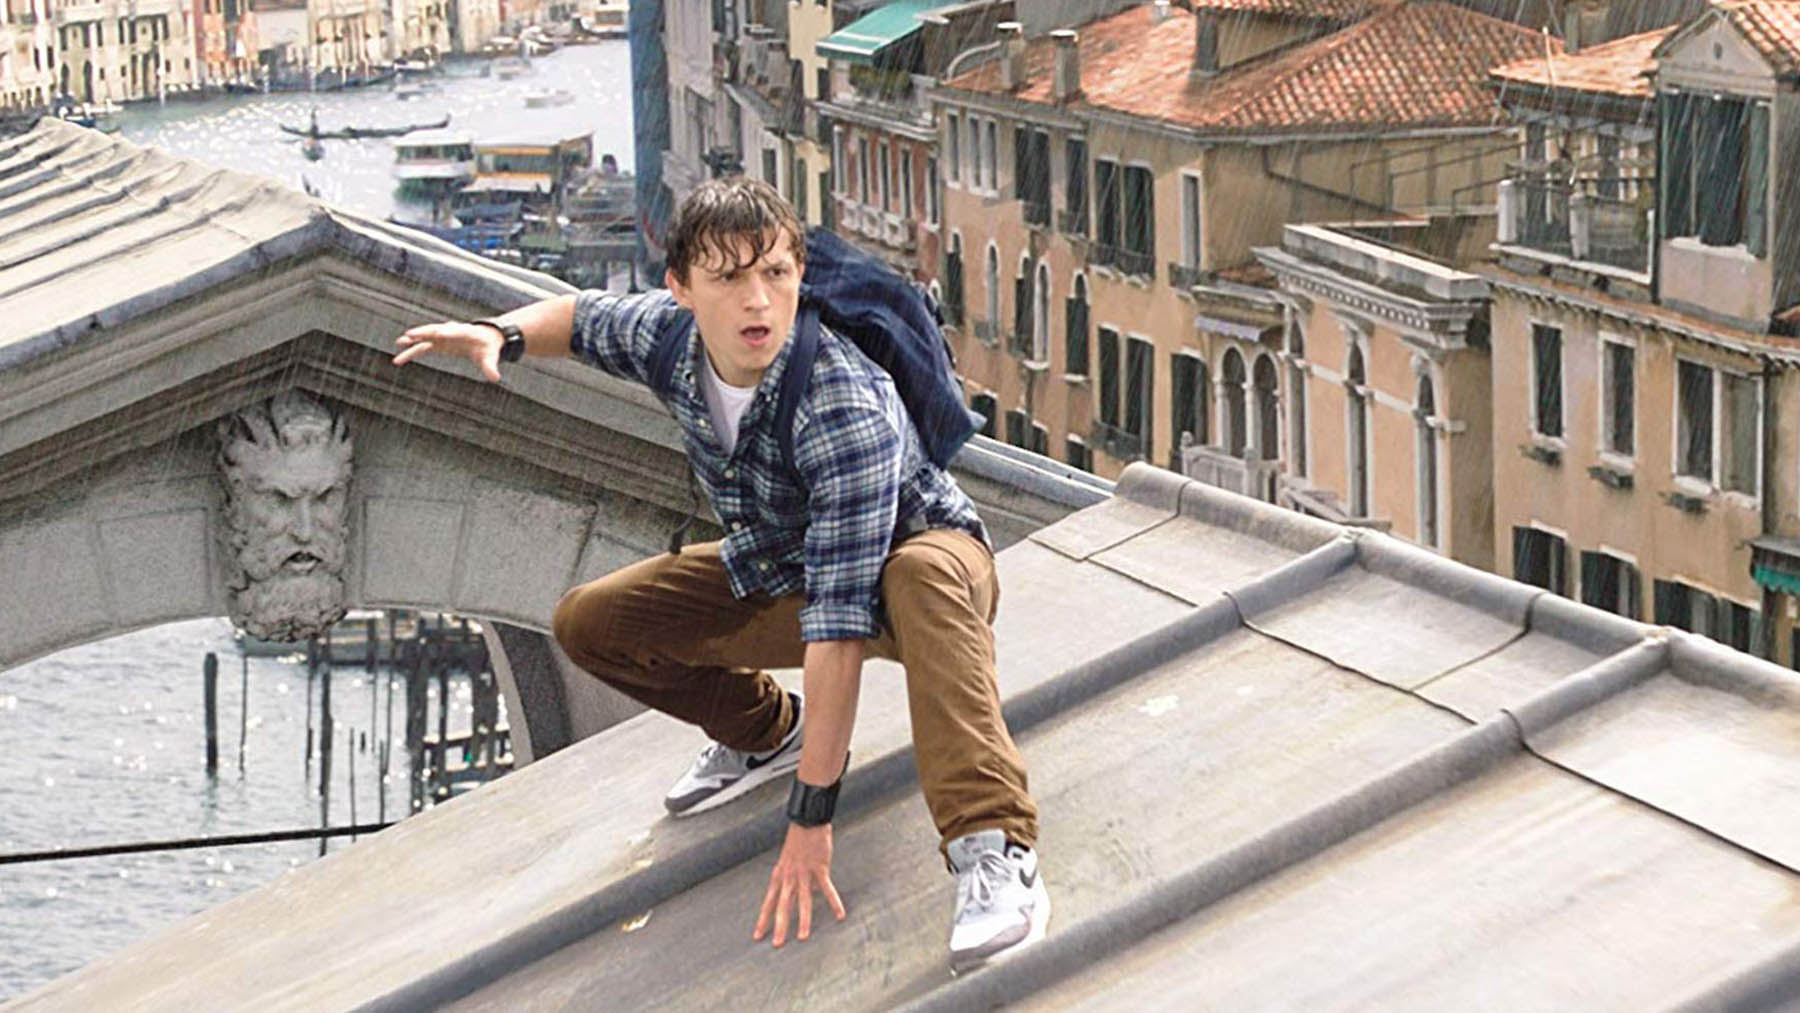 ‘Spider-man: Far from home’ (Disney/Sony Pictures)